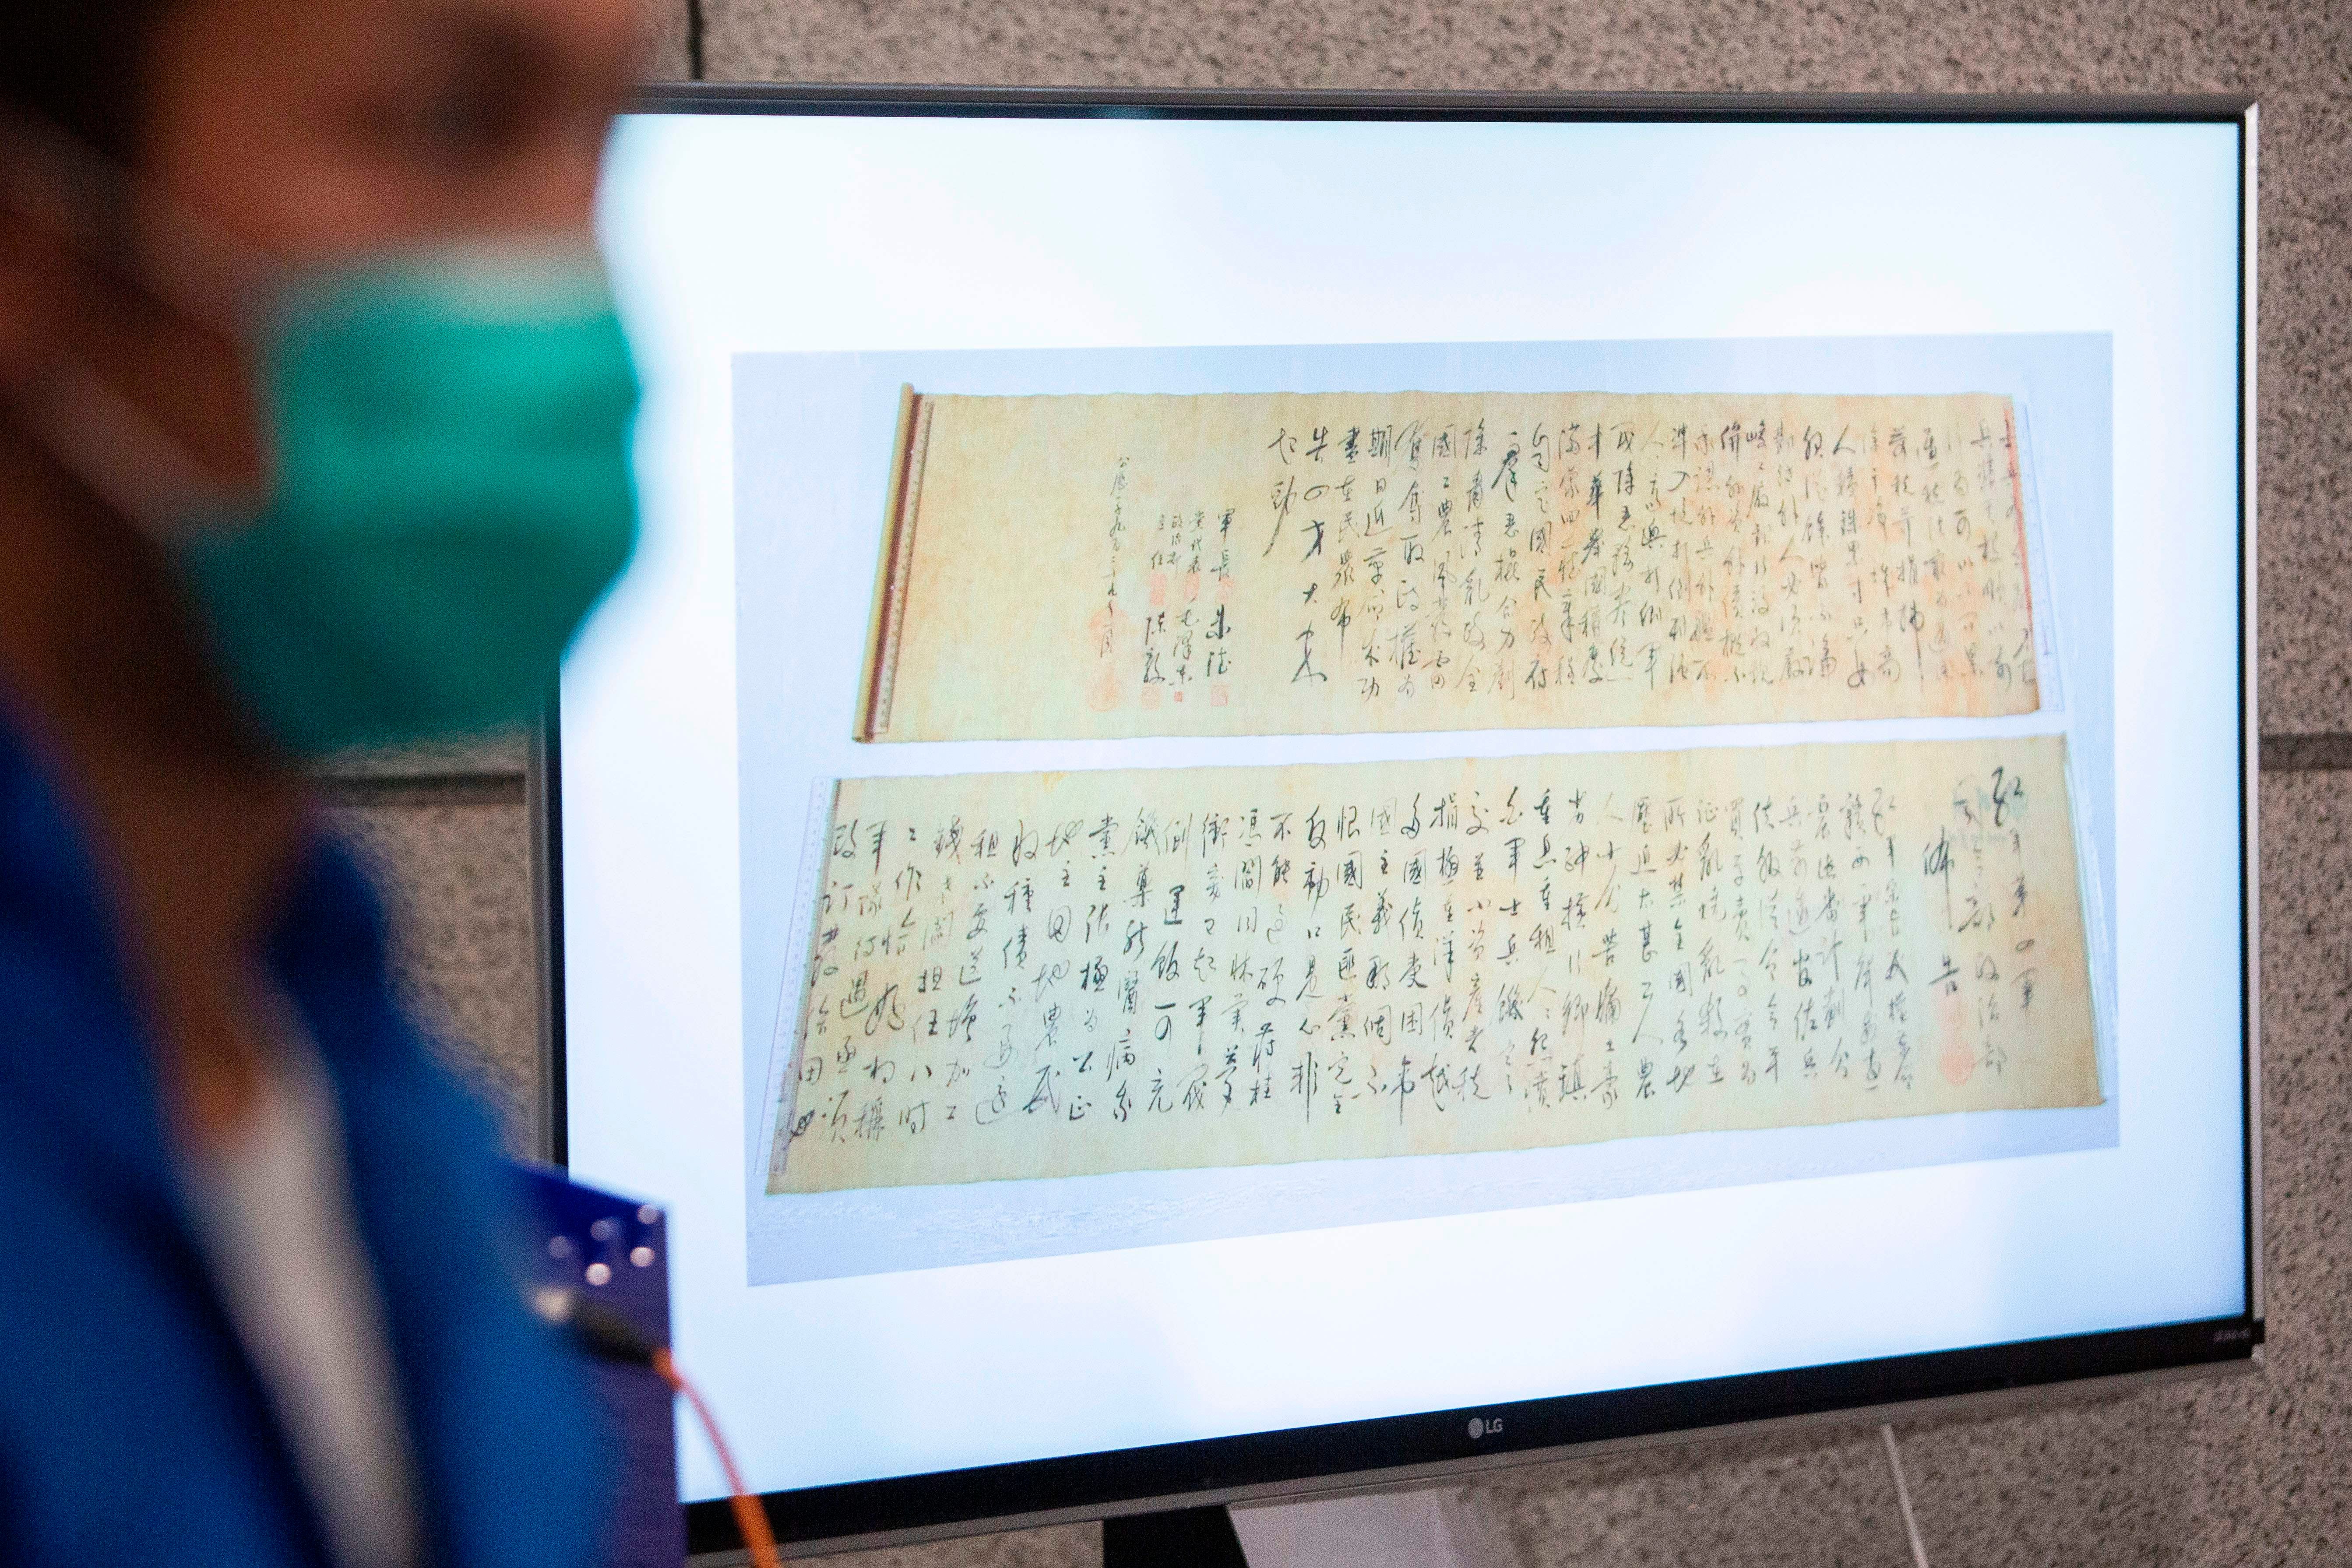 Police show a picture of a calligraphy scroll written by Mao Zedong worth about 300 million USD, that had been recovered but found chopped in half at a press conference in Hong Kong